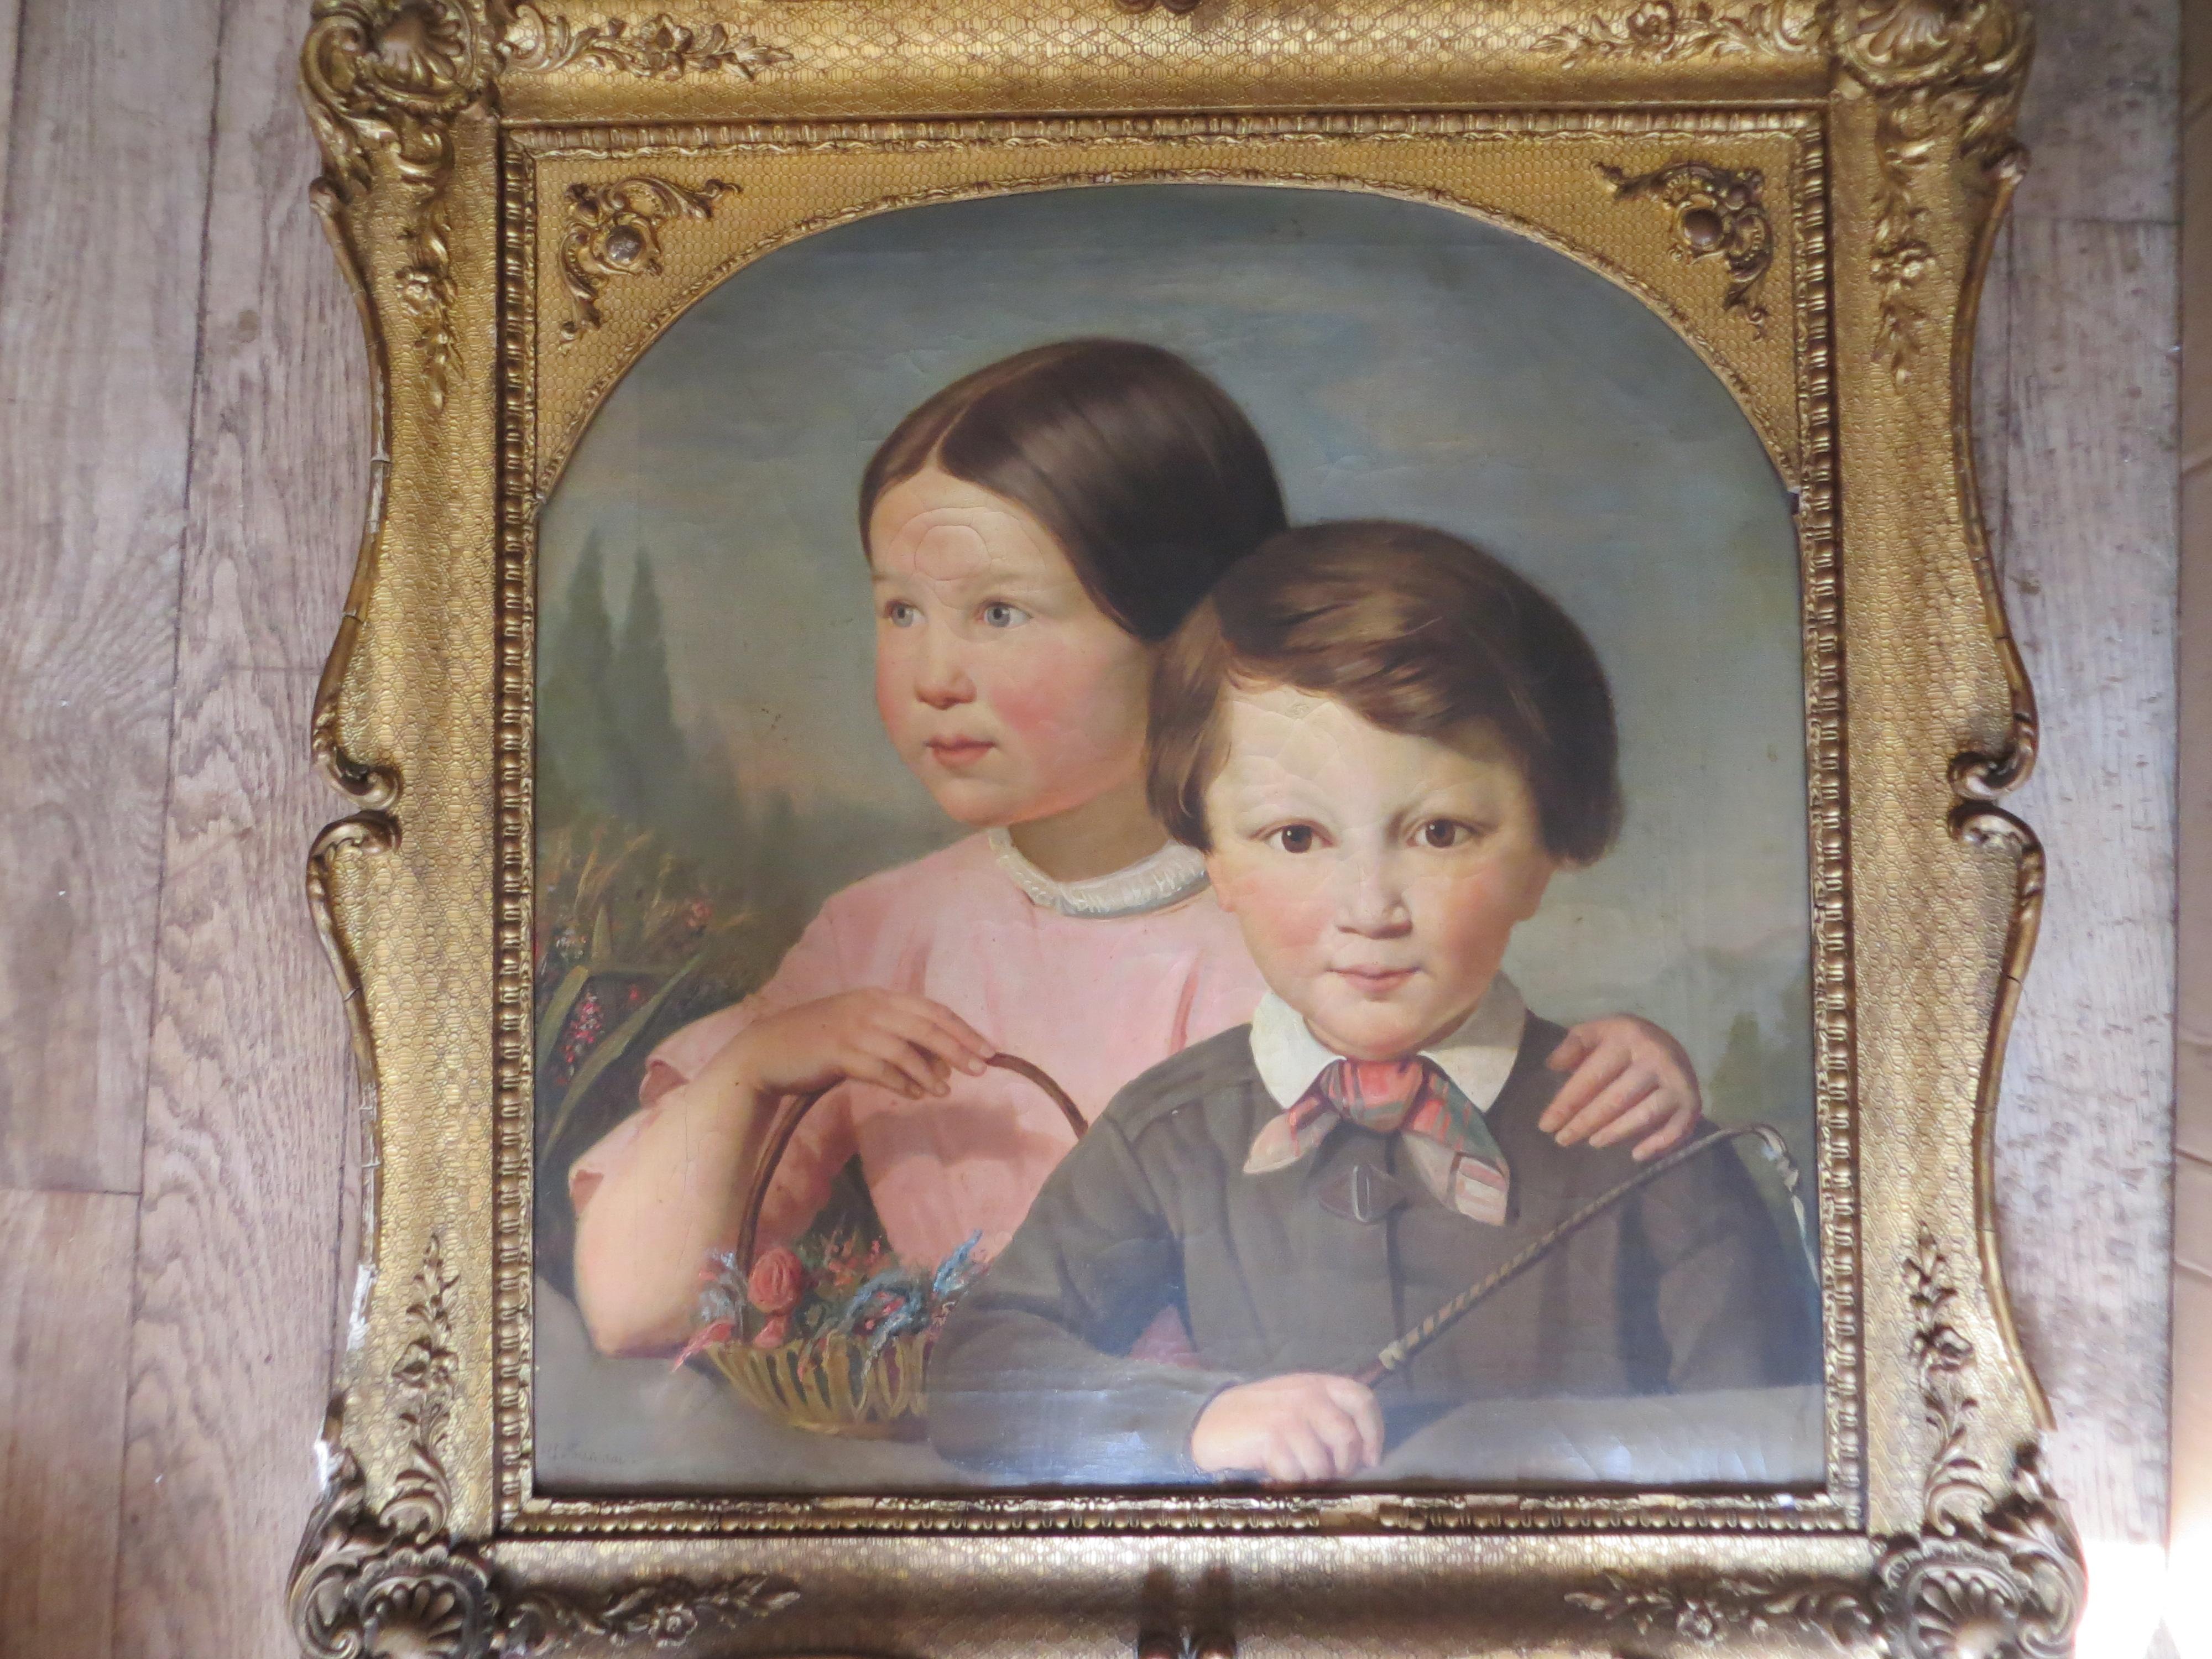 Boy and Girl with  flowers and whip  - Romantic Painting by Unknown